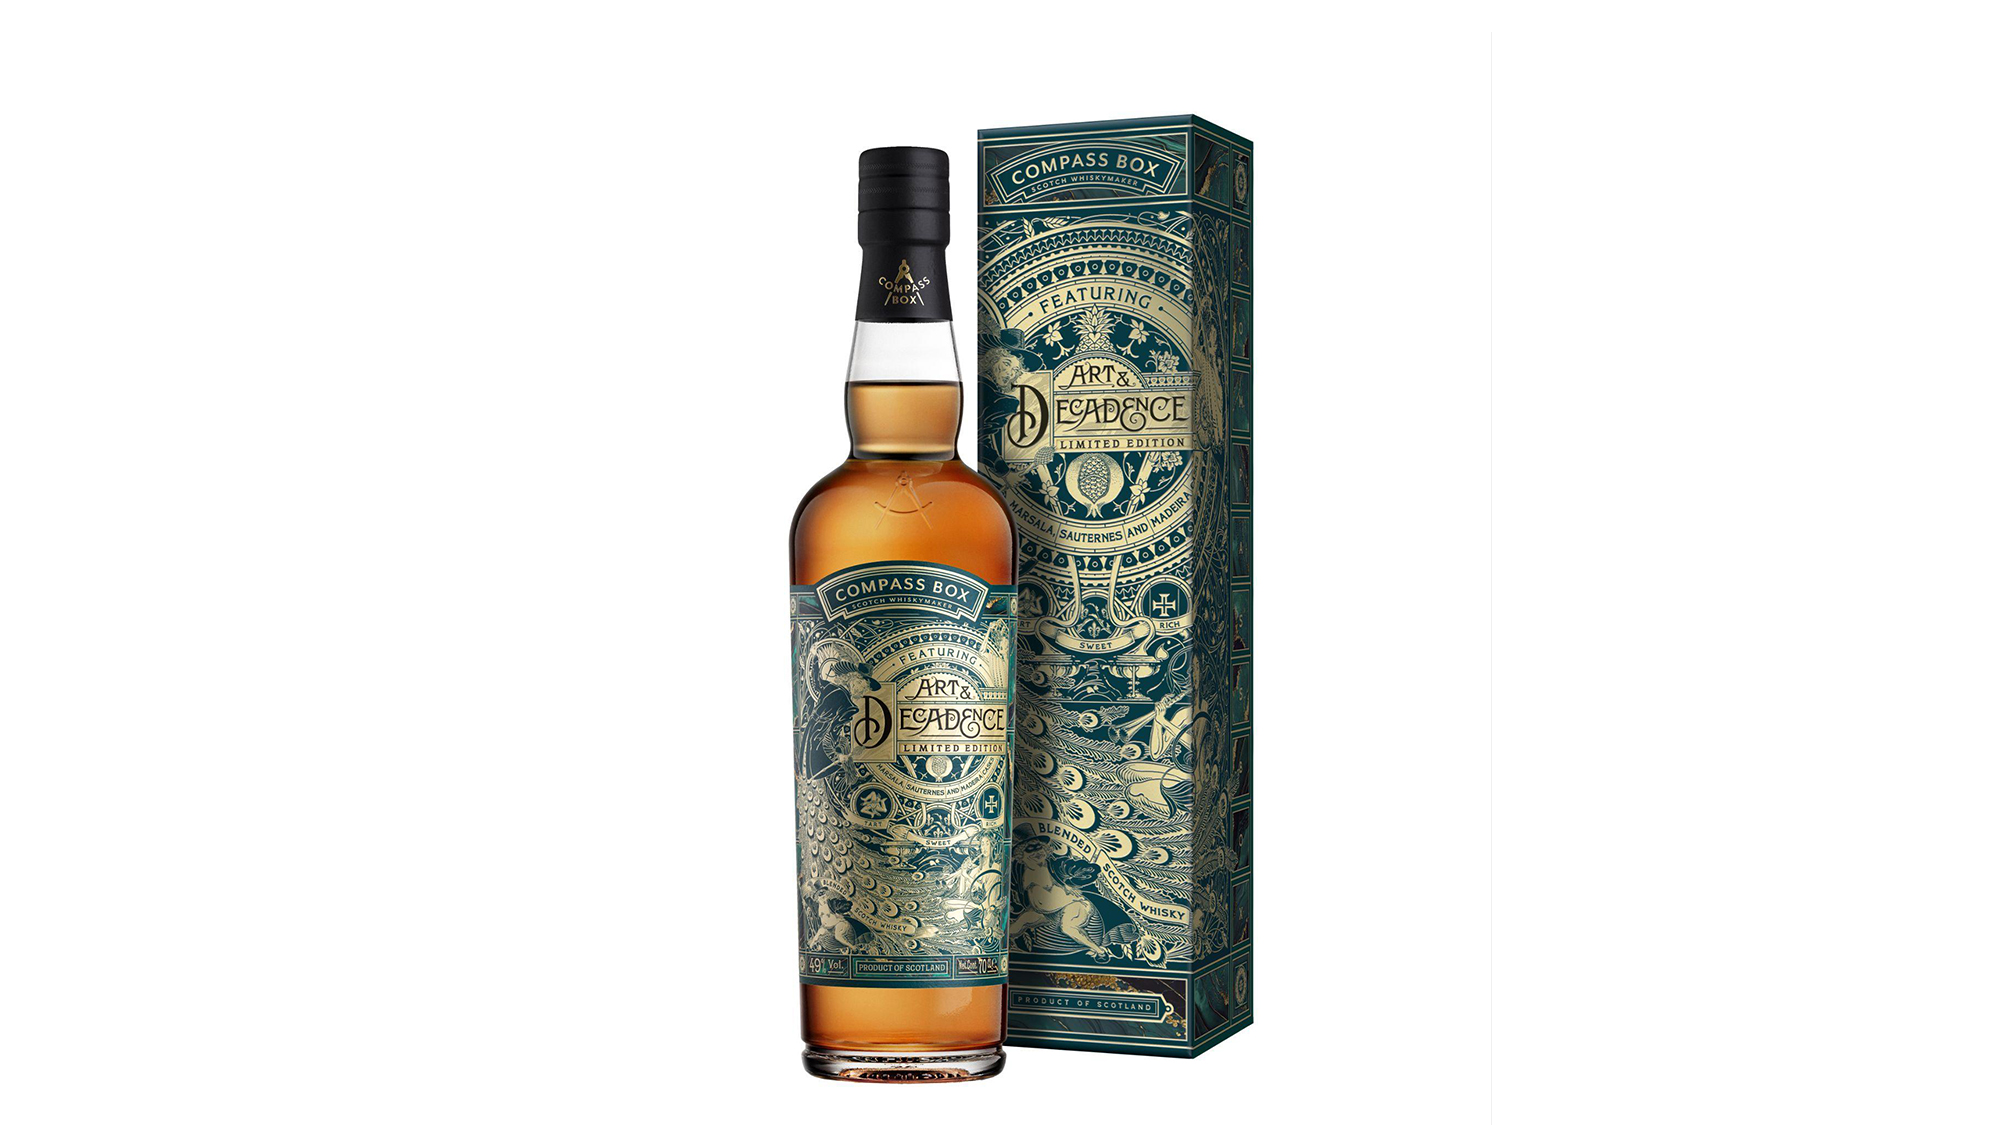 Compass Box Blends Madeira, Sauternes, And Marsala Casks To Create One Of The Year’s Most Opulent Whiskies, Art & Decadence